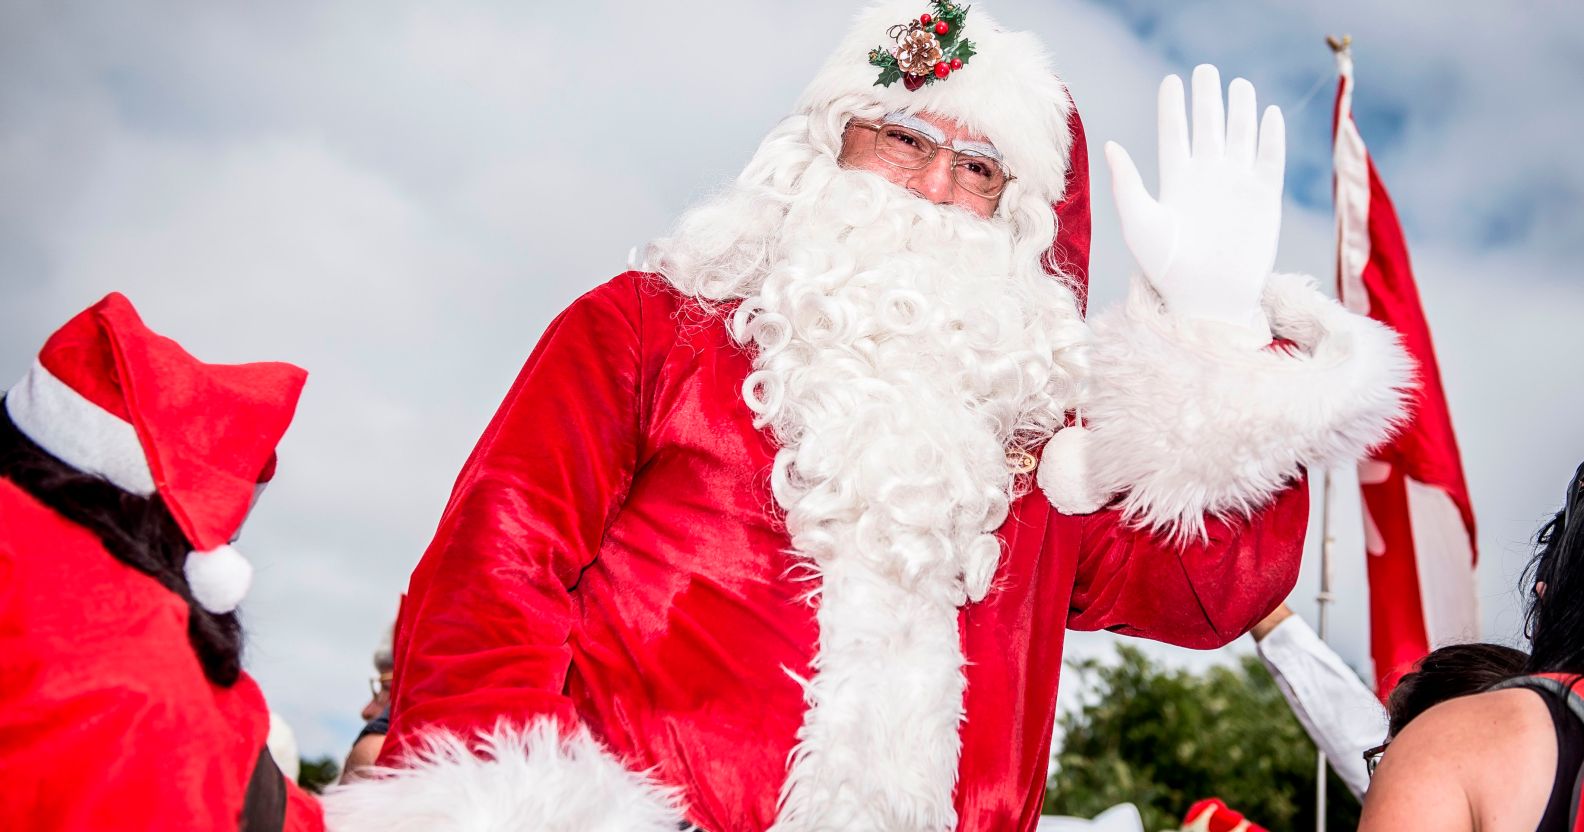 Santa Claus, who is the focus of a debate in Newton Aycliffe, County Durham, after local resident asked if he could be played by a woman